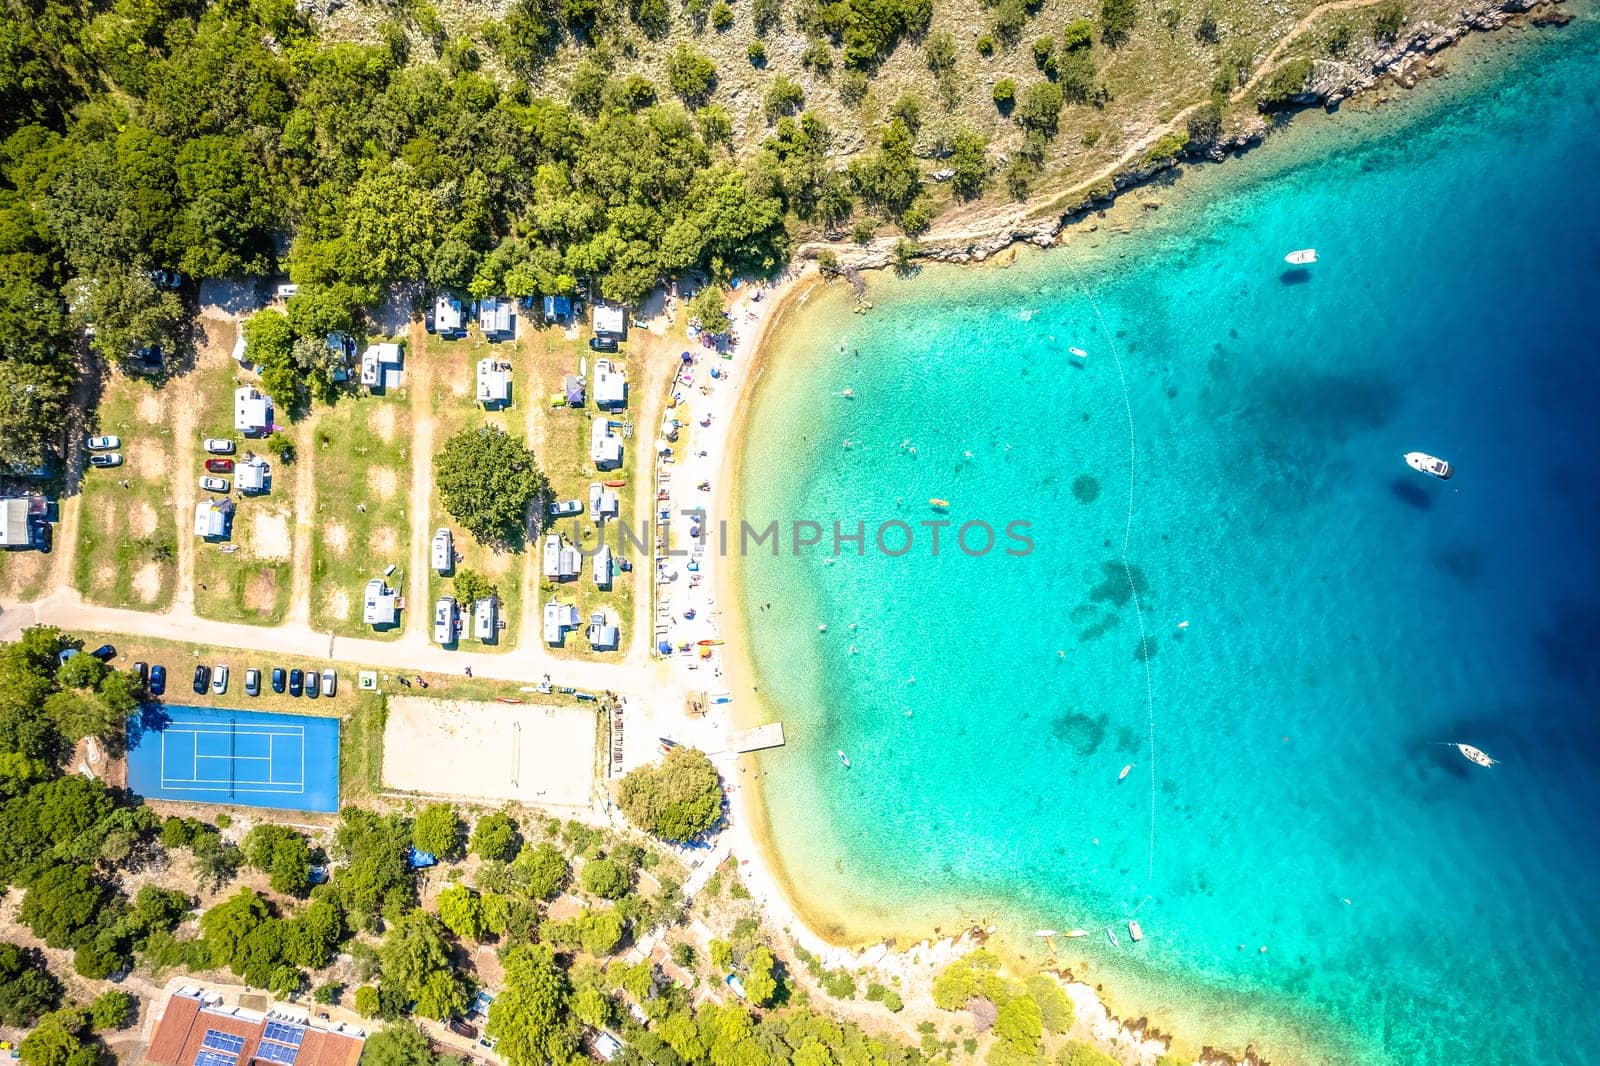 Camping by the idyllic turquoise beach in Punat, island of Krk, archipelago of Croatia